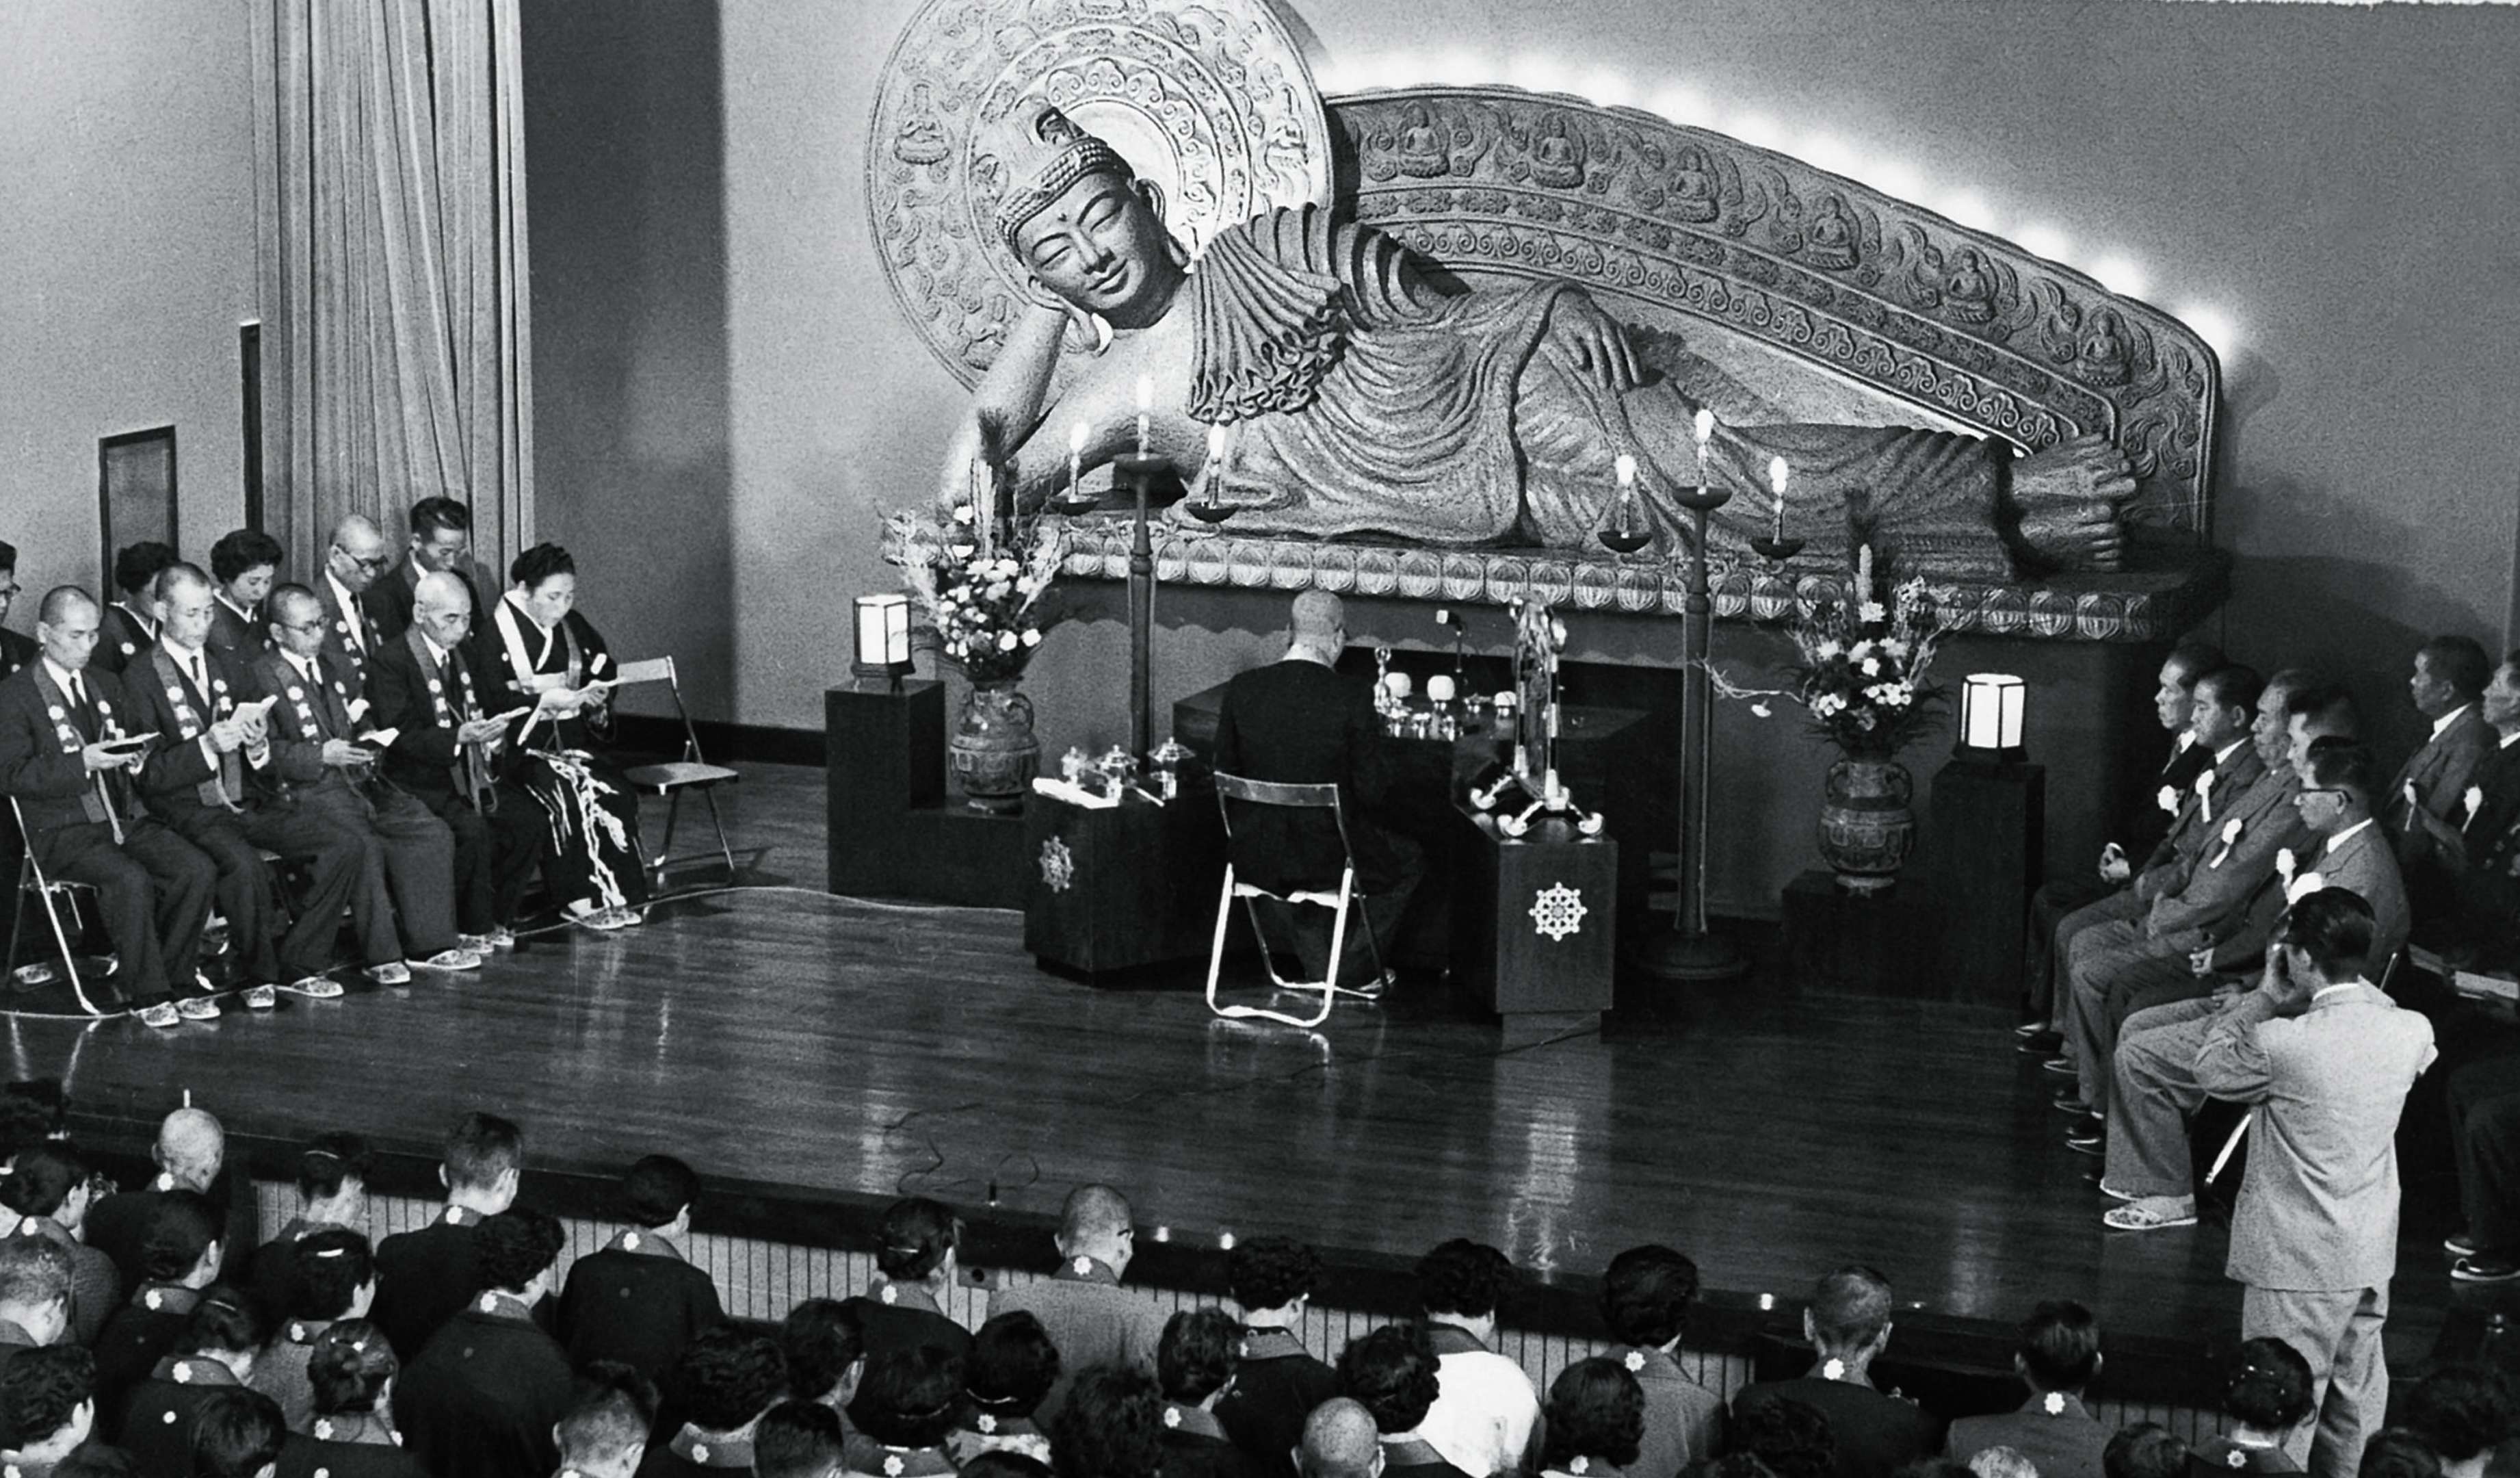 Shinjo, facing away, conducts a rite on a stage before a massive sculpture of a reclining buddha, with a group of priests seated to the left and laypeople to the right, and an audience looking on.